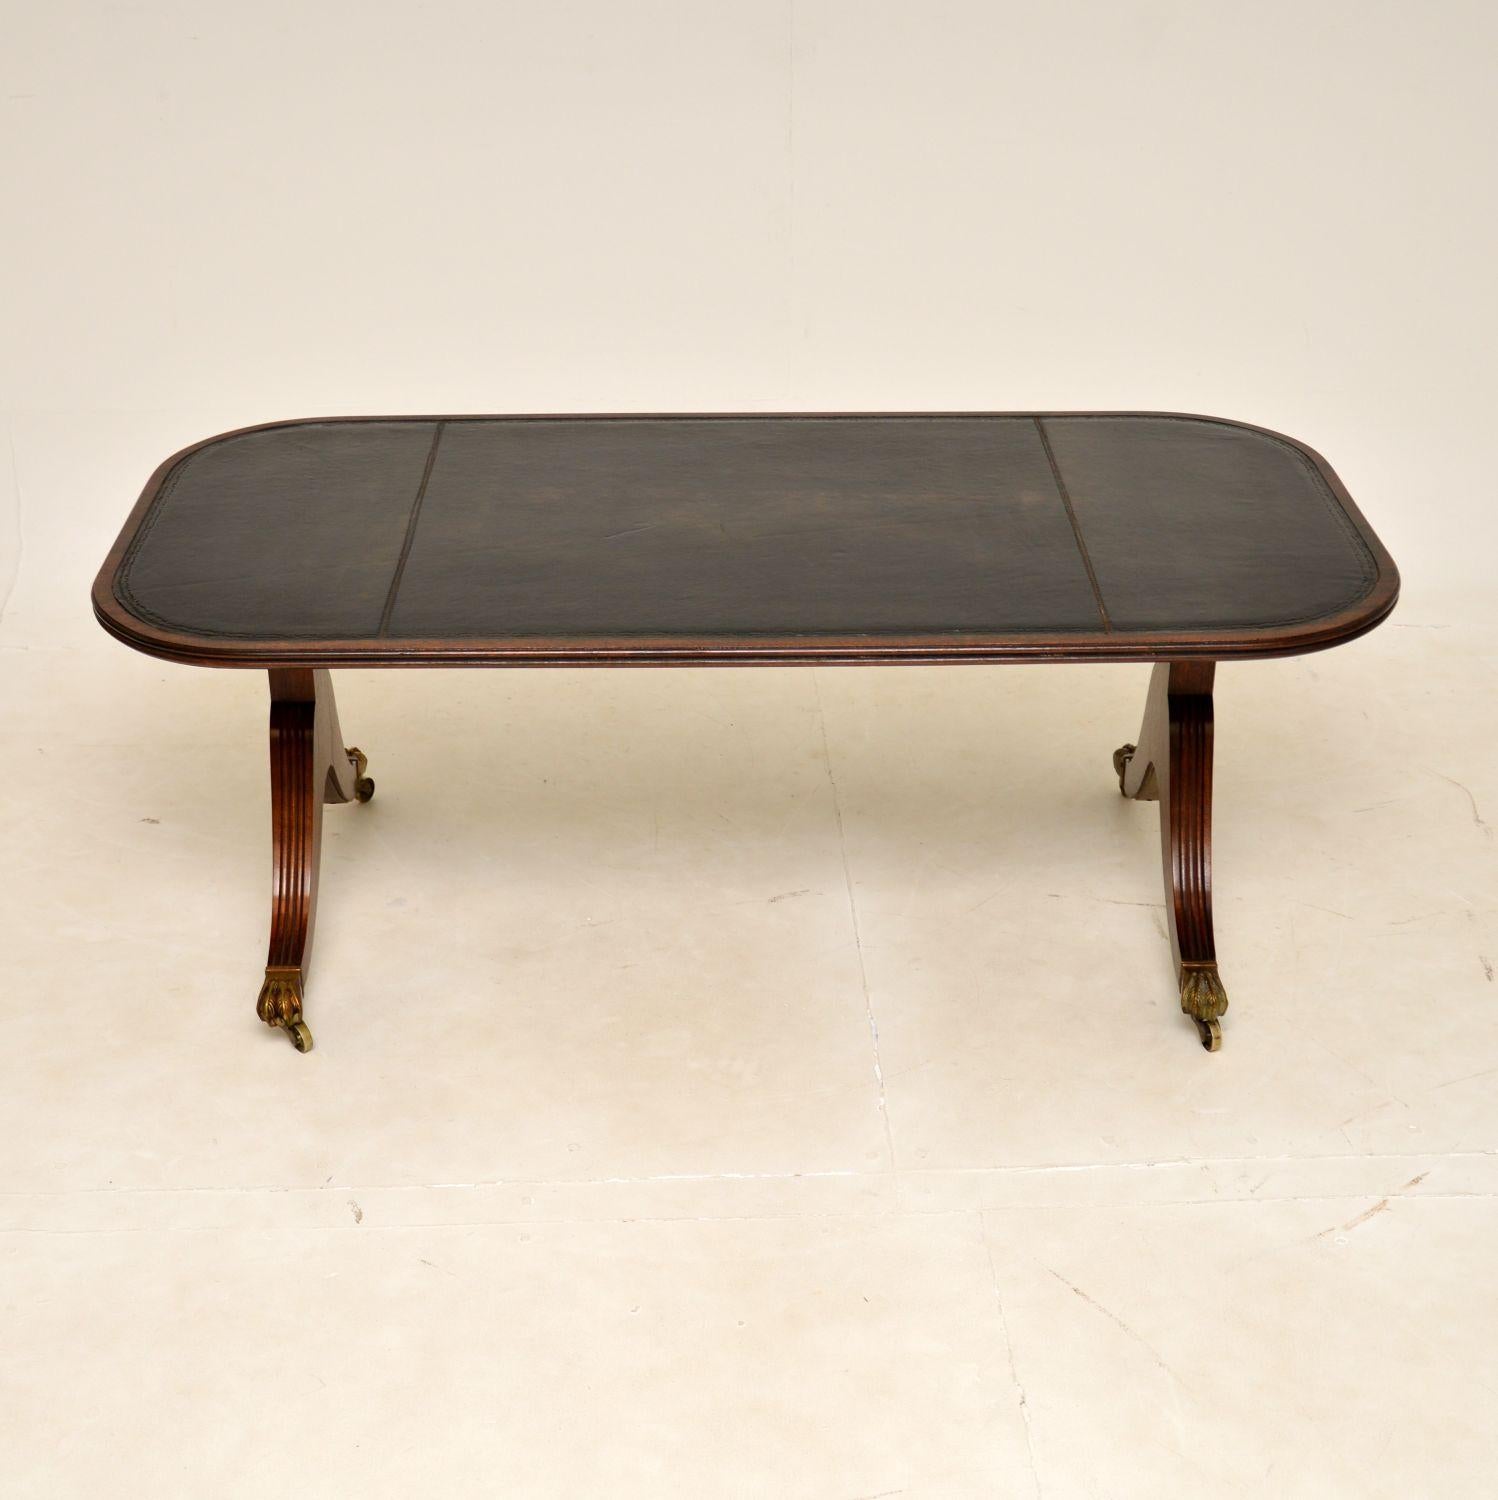 A large and impressive antique leather top coffee table in the Regency style. This was made in England, it dates from around the 1930s.

The quality is outstanding, this is beautifully made and sits on a sturdy, solid base. The legs are nicely